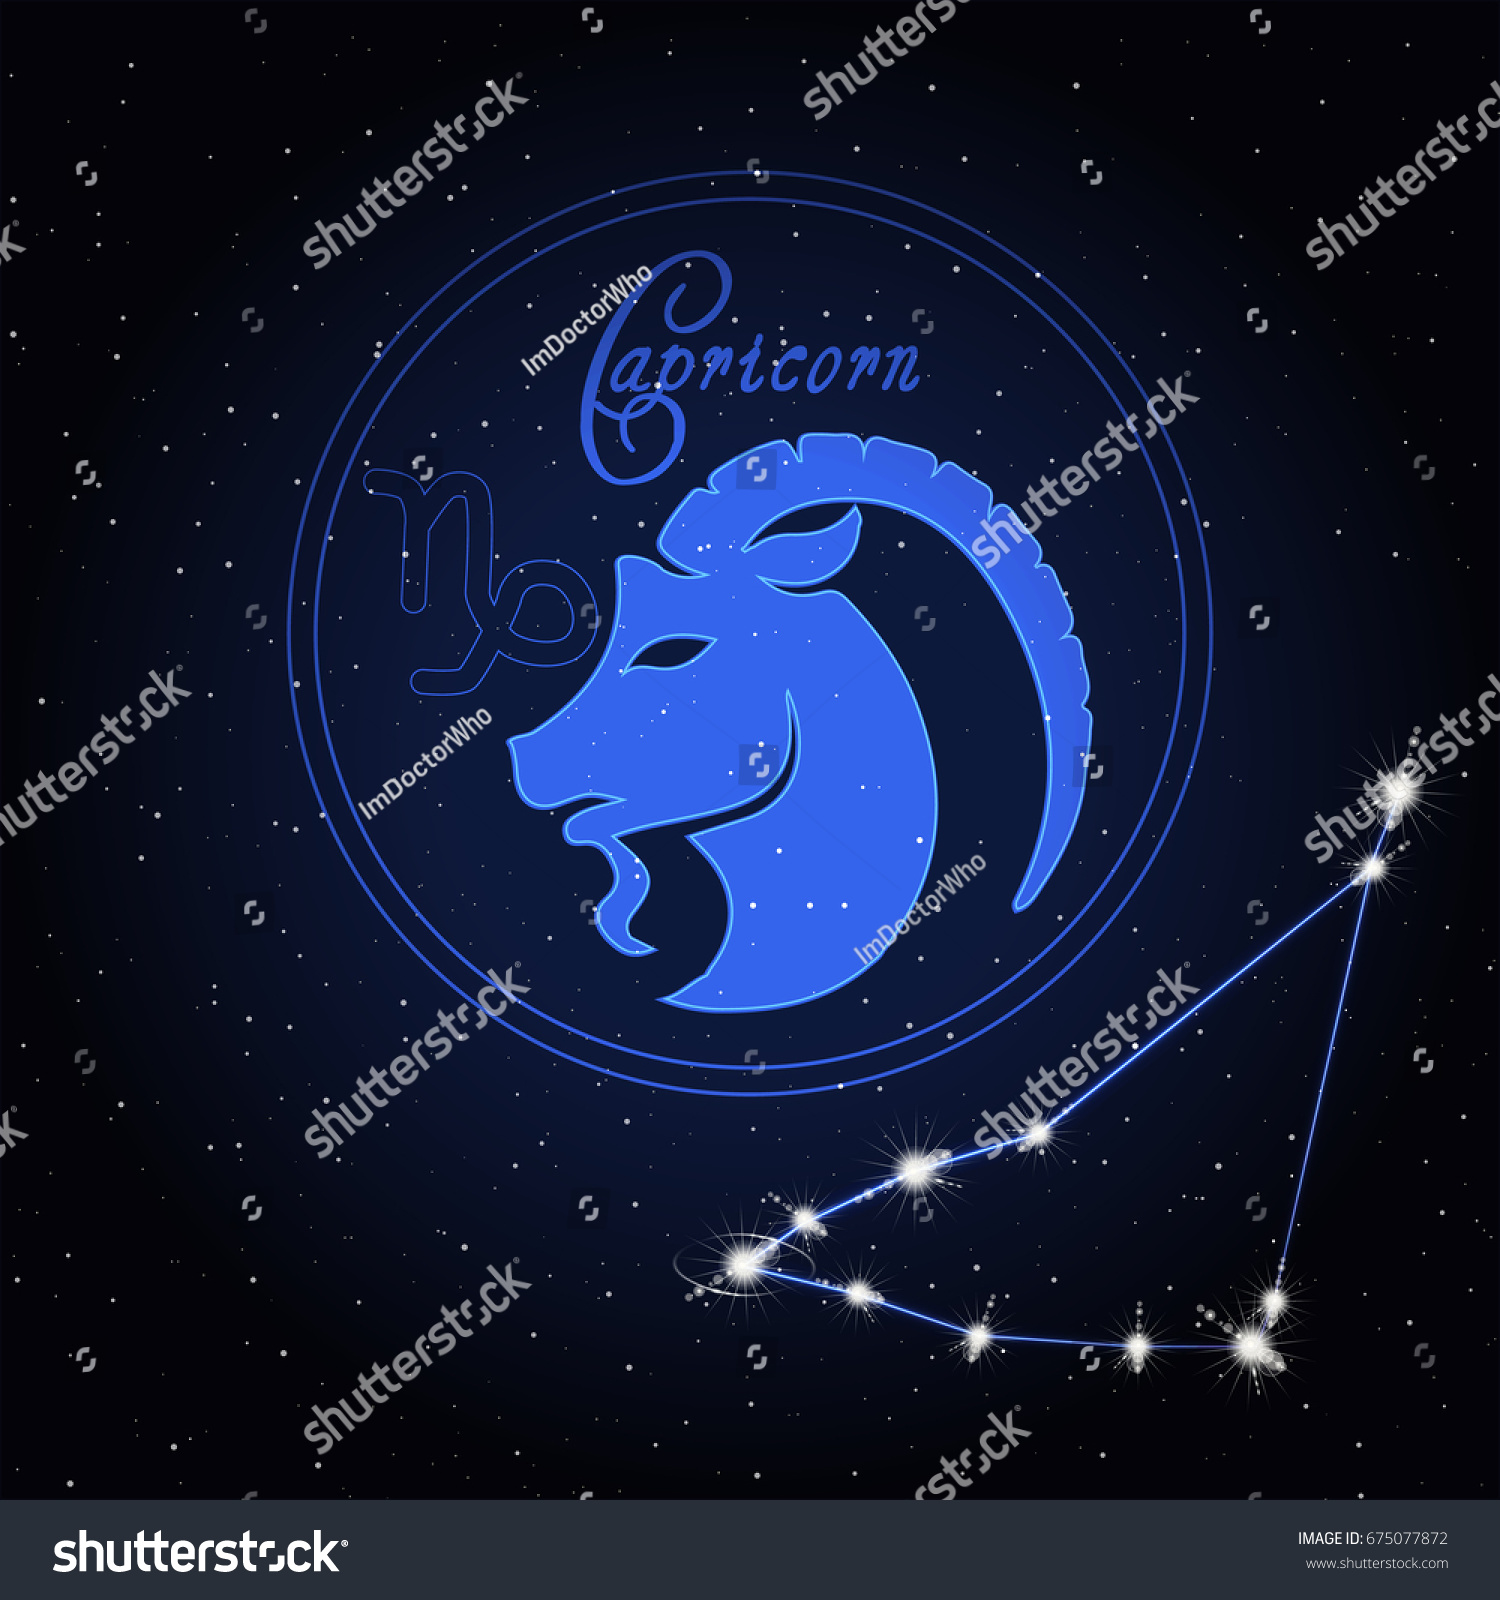 Constellation Sign Zodiac Against Background Starry Stock Vector ...